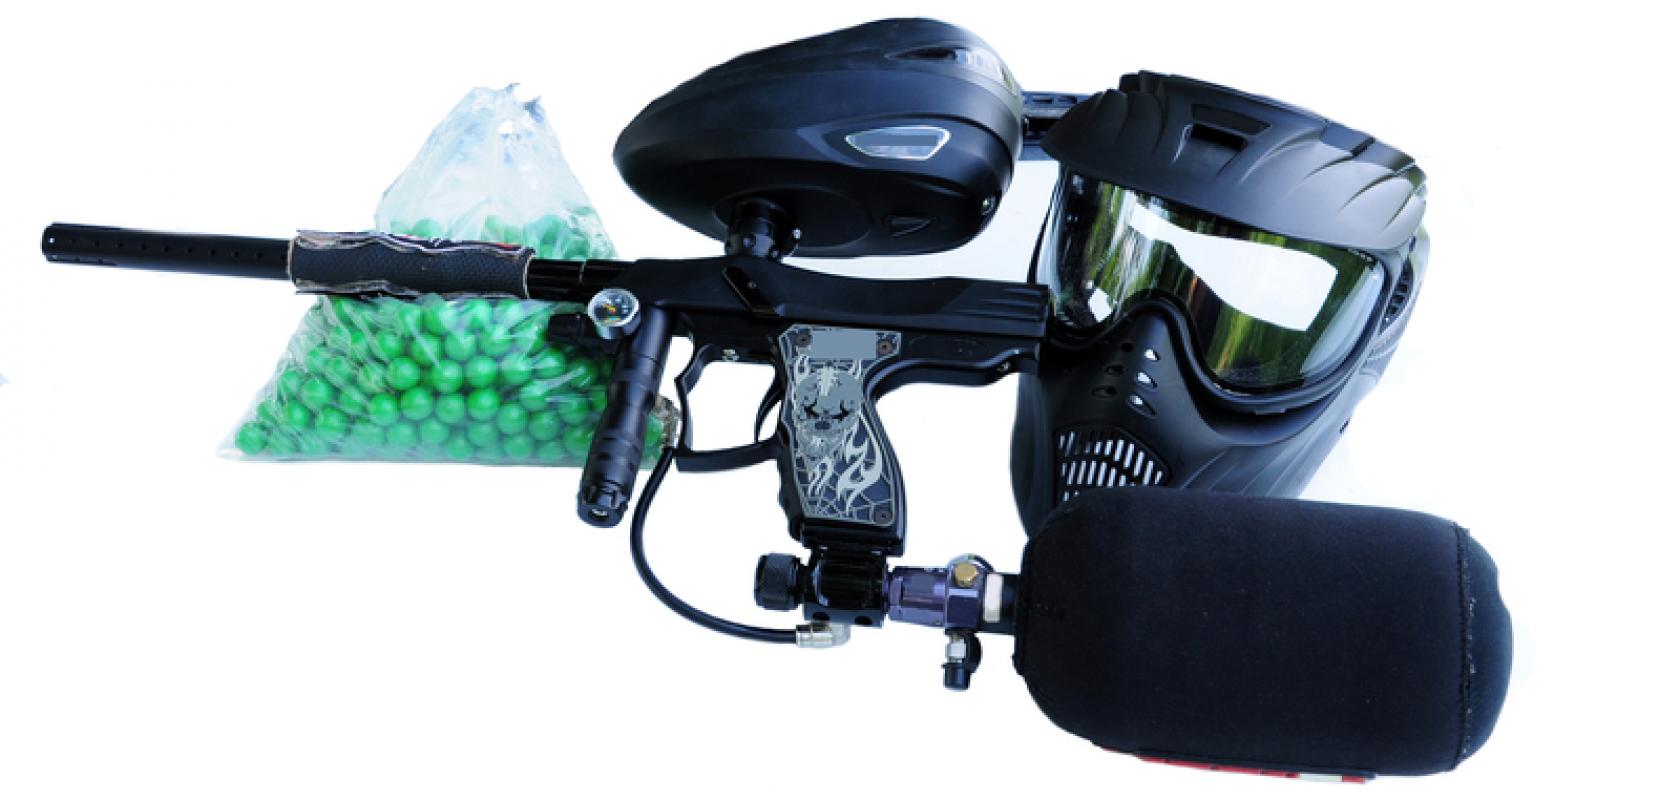 In Stock Paintball Guns and Paintball Gear